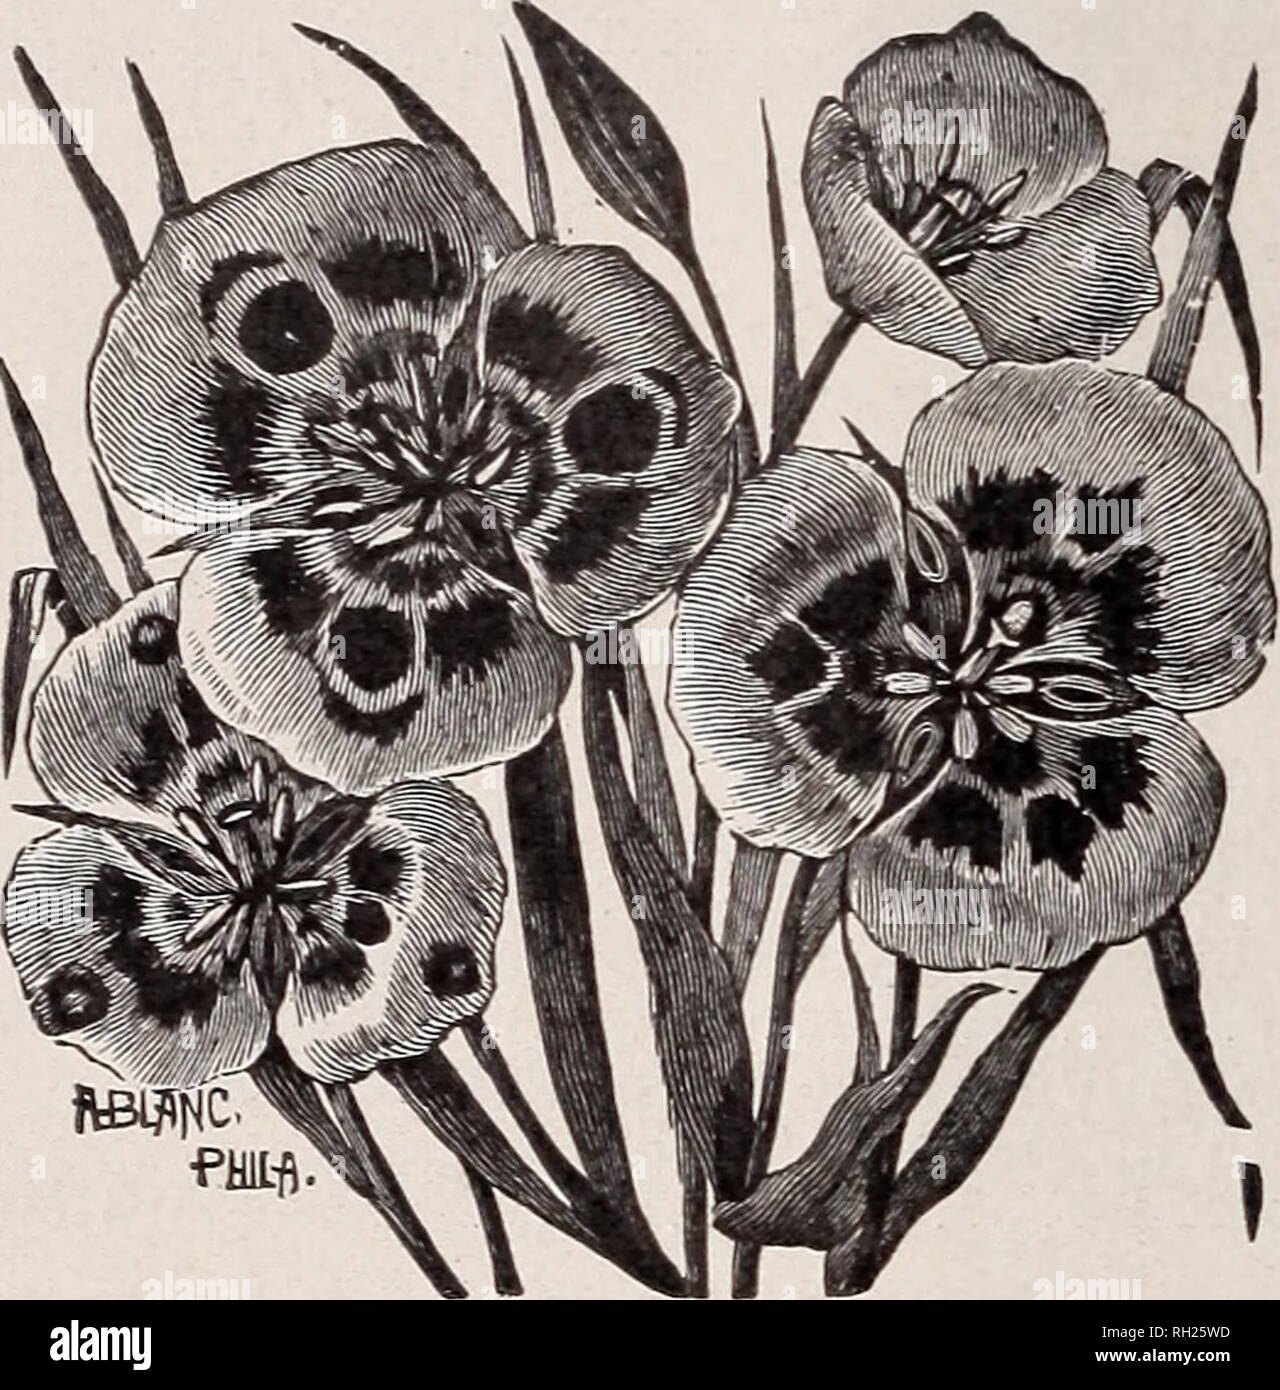 . Bulbs for fall and winter planting. Nurseries (Horticulture) Catalogs; Flowers Seeds Catalogs; Bulbs (Plants) Catalogs; Vegetables Catalogs; Plants, Ornamental Catalogs; Gardening Equipment and supplies Catalogs. 10 THE GERMAIN SEED &amp; PLANT CO. CALOCHORTUS: Continued Each PerDz. Venustus El Dorado, unsurpassed for beauty and variety of color, varying from white, pink salmon, rich red, lilac to dark, velvety purple. All are marked with a showy yellow and brown eye, and beautifully lined and dotted. To some is added a large gold blotch at the apex of each petal, and all have showy red cent Stock Photo